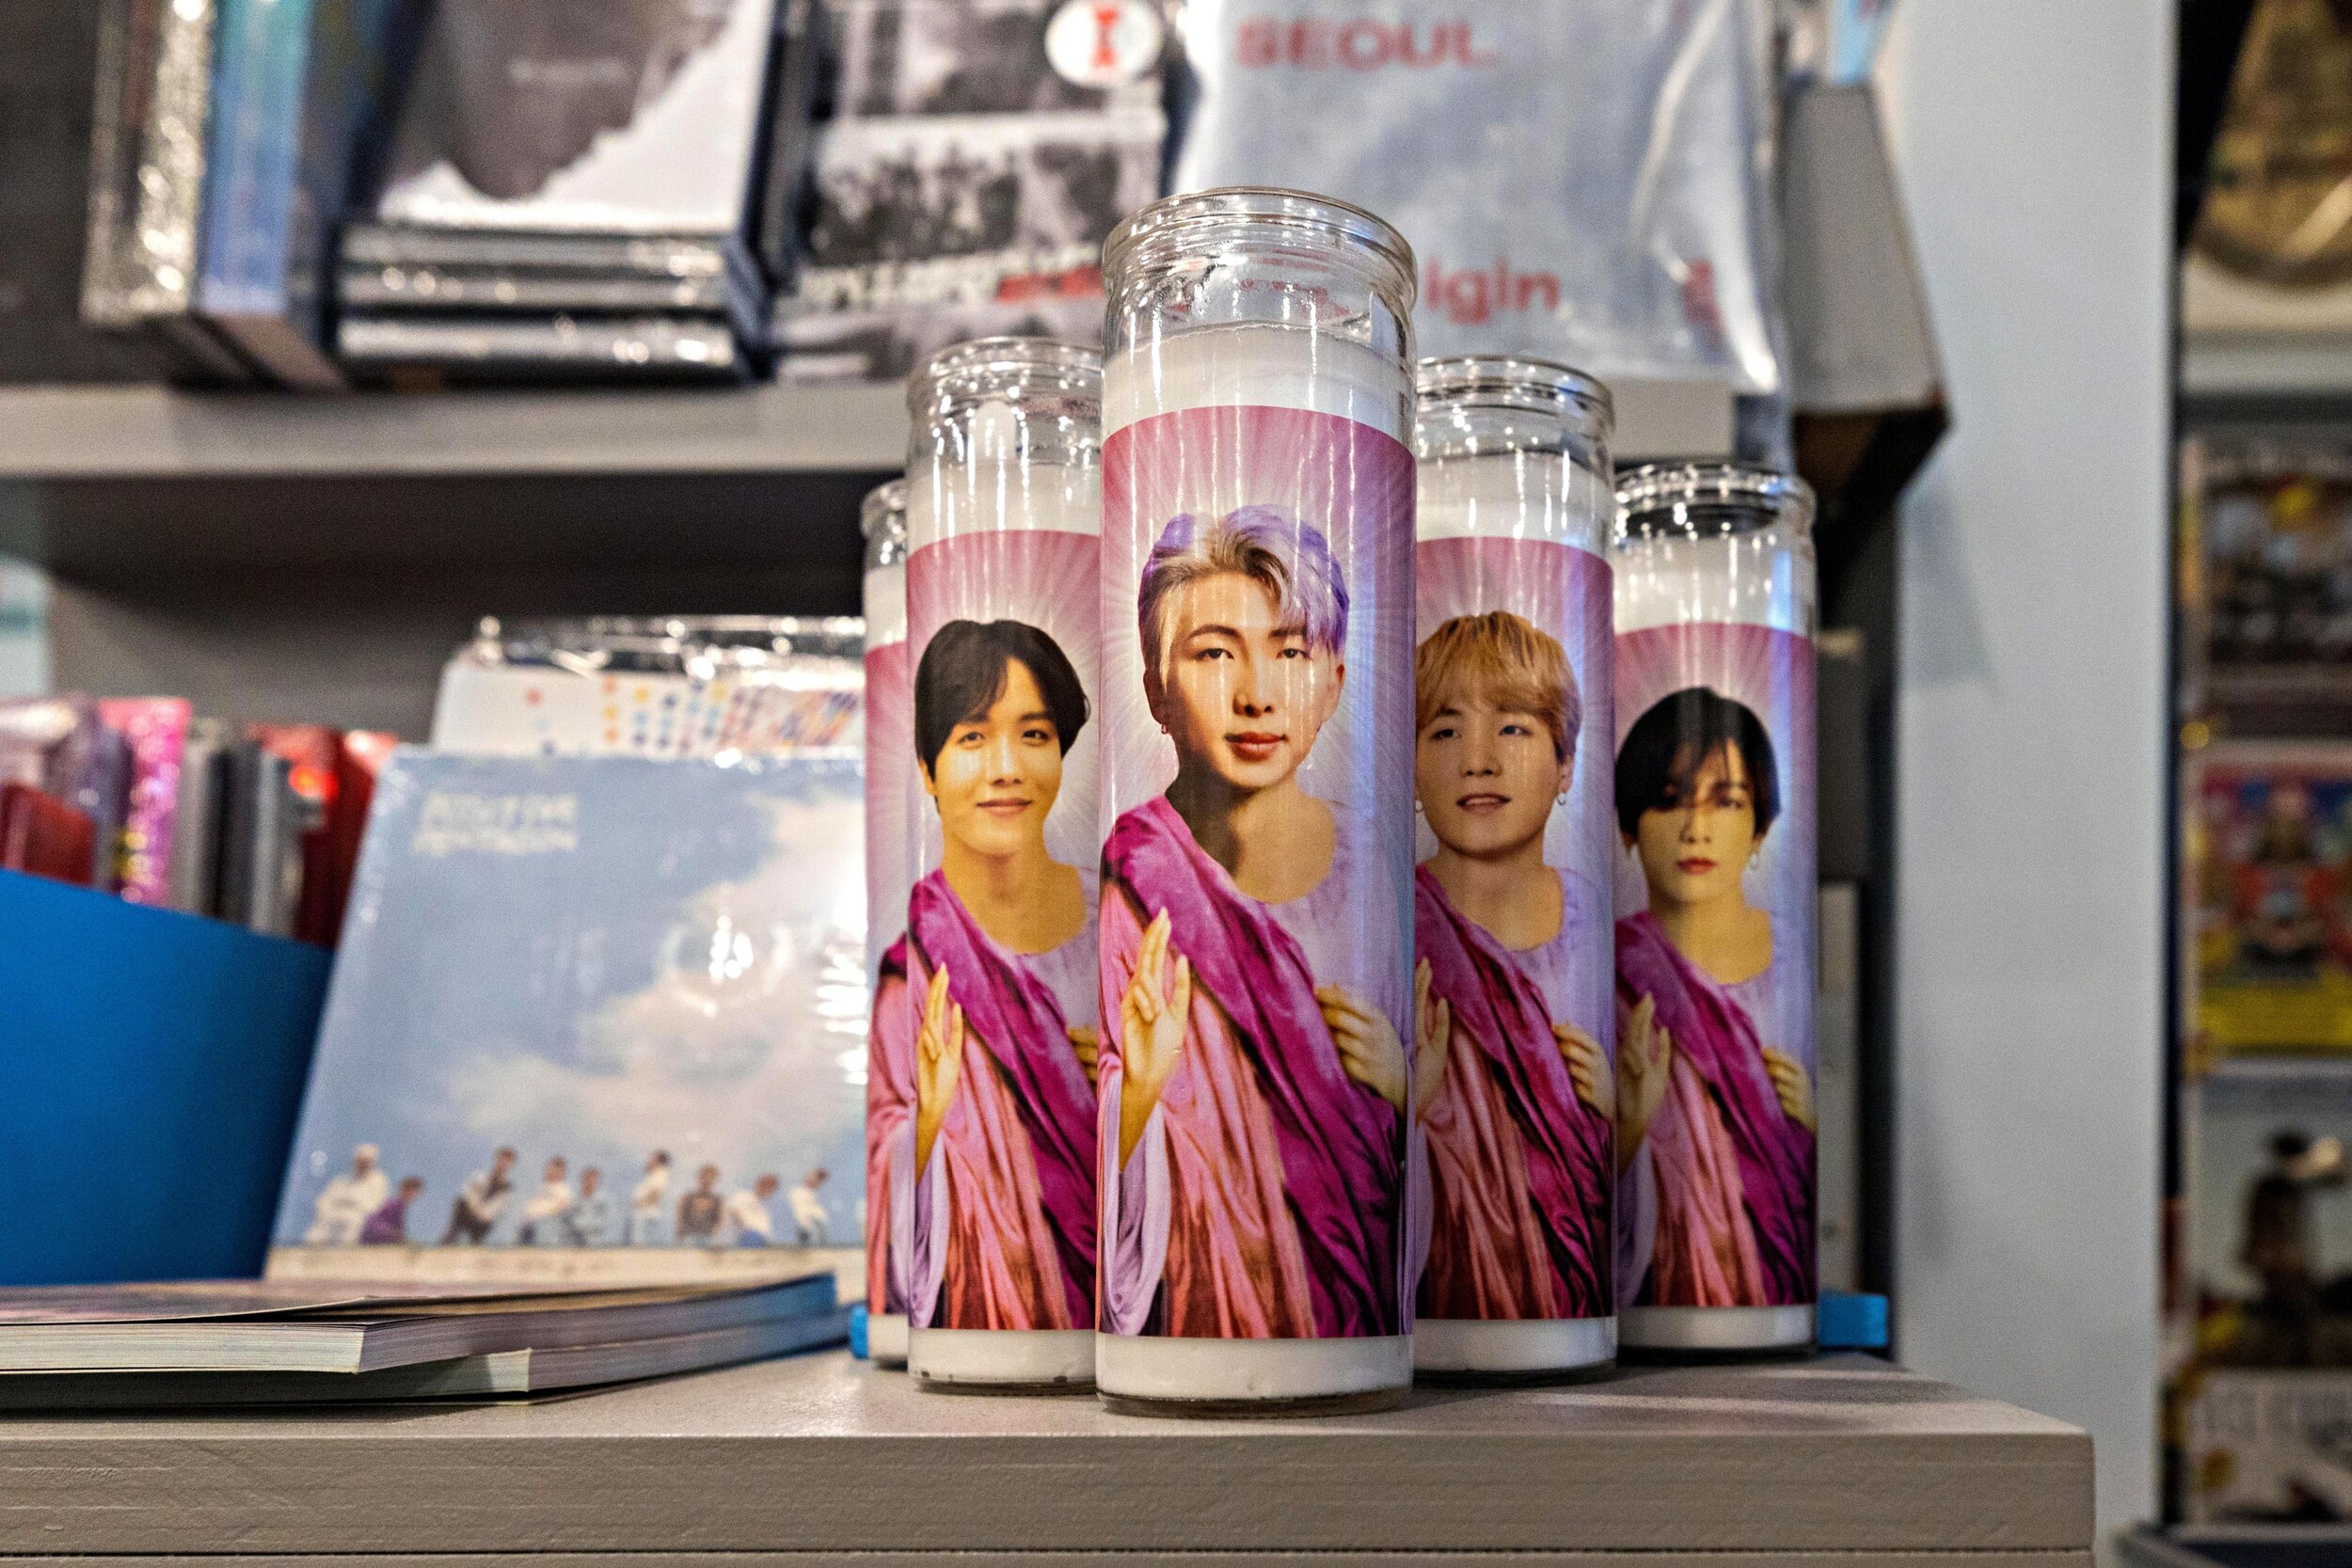  K-Pop display featuring members of the band BTS. Amoeba Music, an iconic Hollywood record store, prepares to reopen at thier new location at 6200 Hollywood Blvd., in Hollywood Neighborhood of Los Angeles, California on Wednesday, March 30, 2021.  Th